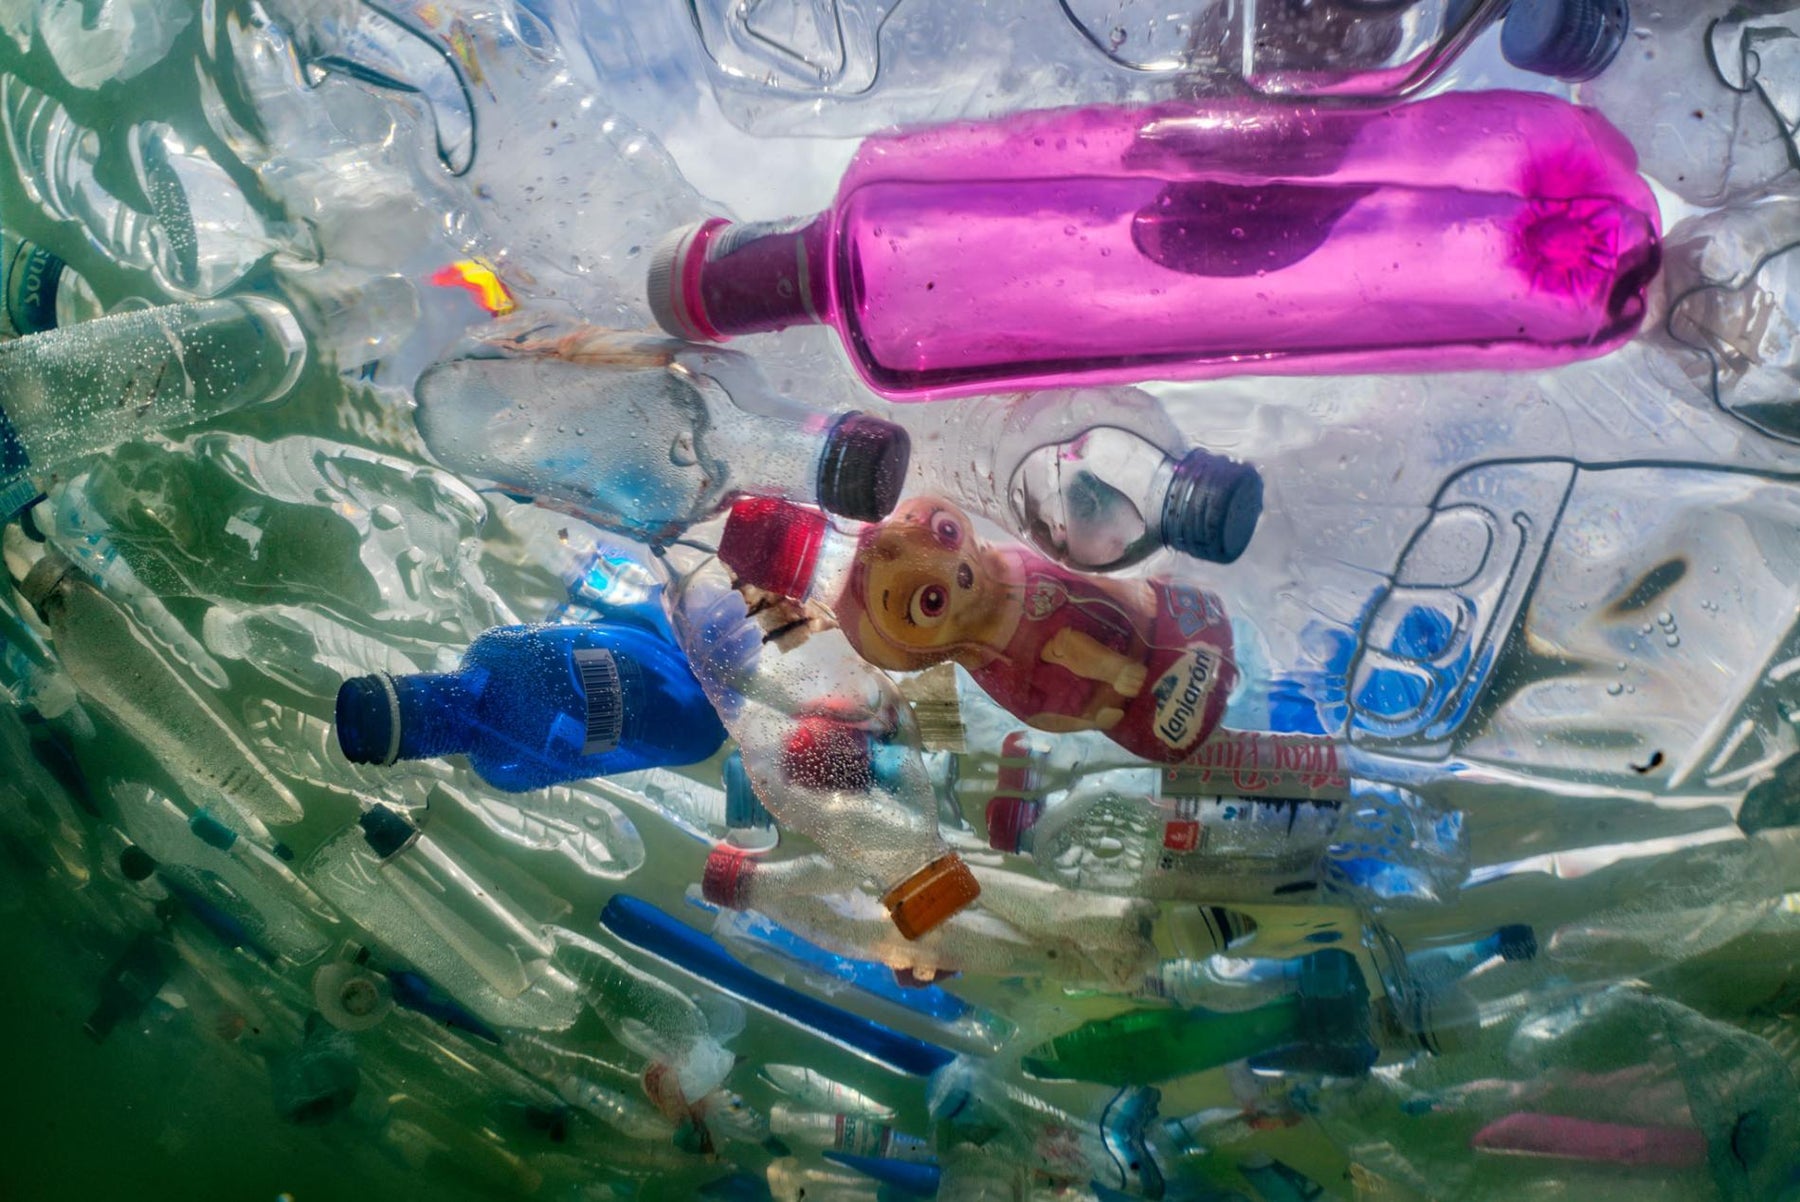 Did You know Plastic Can Take Up to 1000 Years To Decompose?